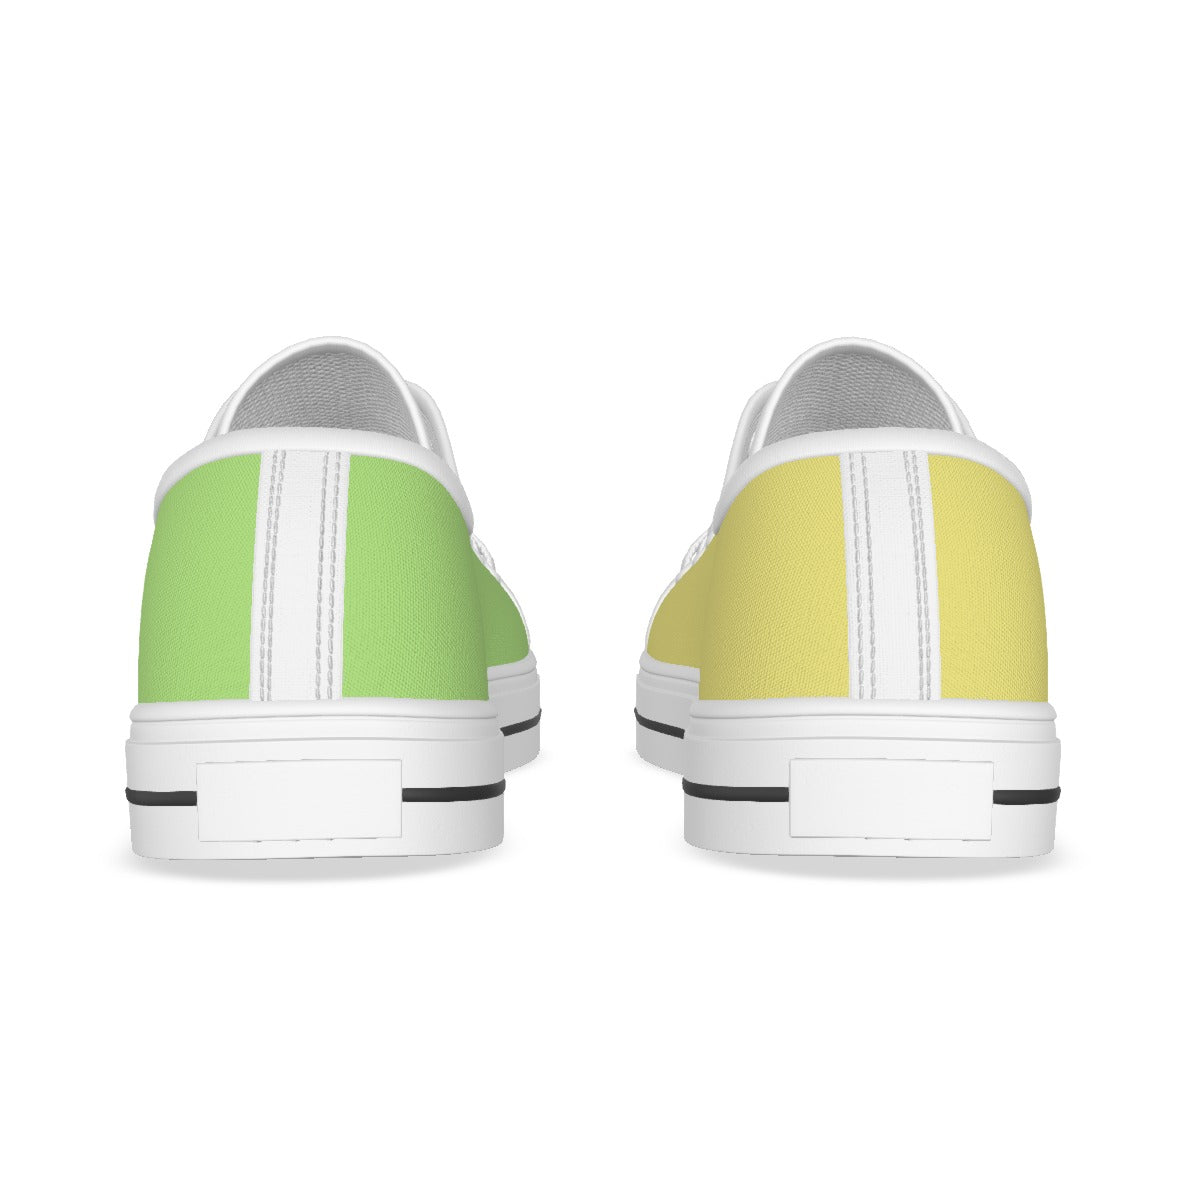 Yoga Shoes for Kids - Anti-Slippery Colorful Shoes - Personal Hour for Yoga and Meditations 